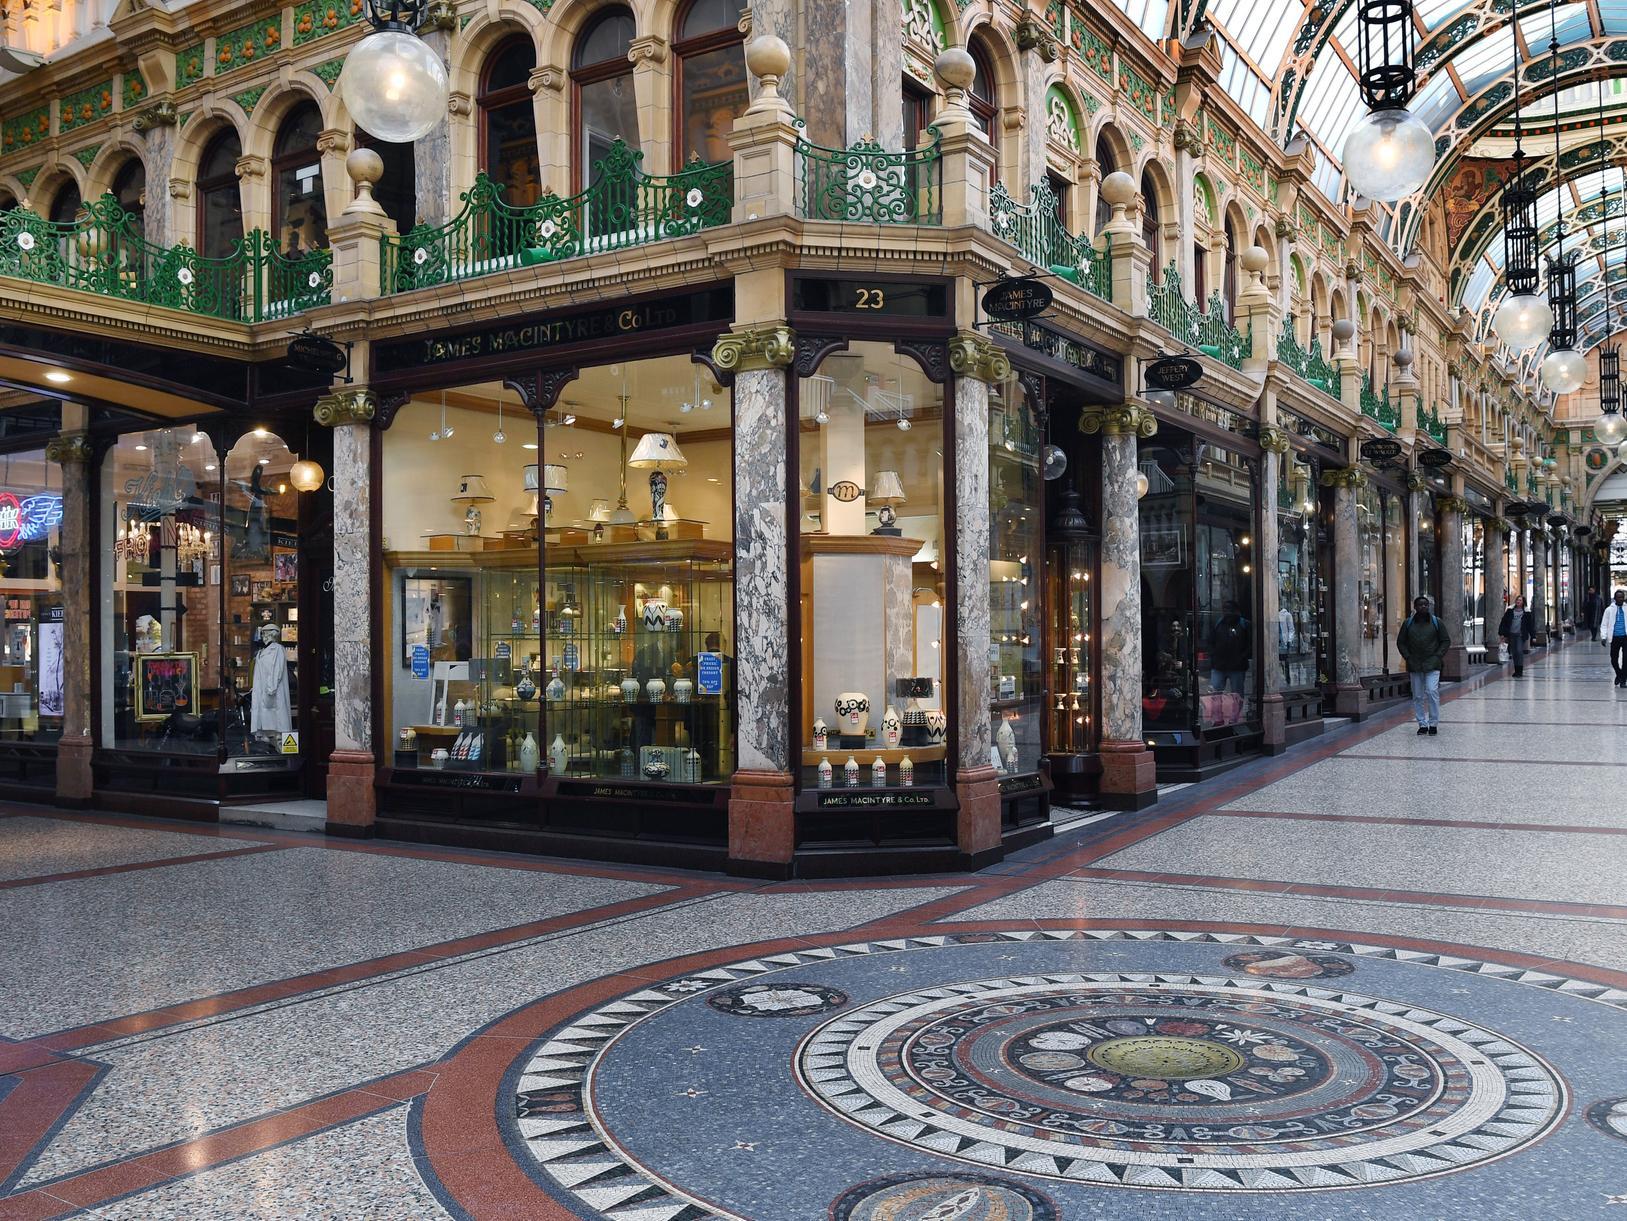 Arguably one of the most beautiful in the country, the County Arcade hosts upmarket boutiques such as Vivienne Westwood, Charbonnel & Walker and Molton Brown.